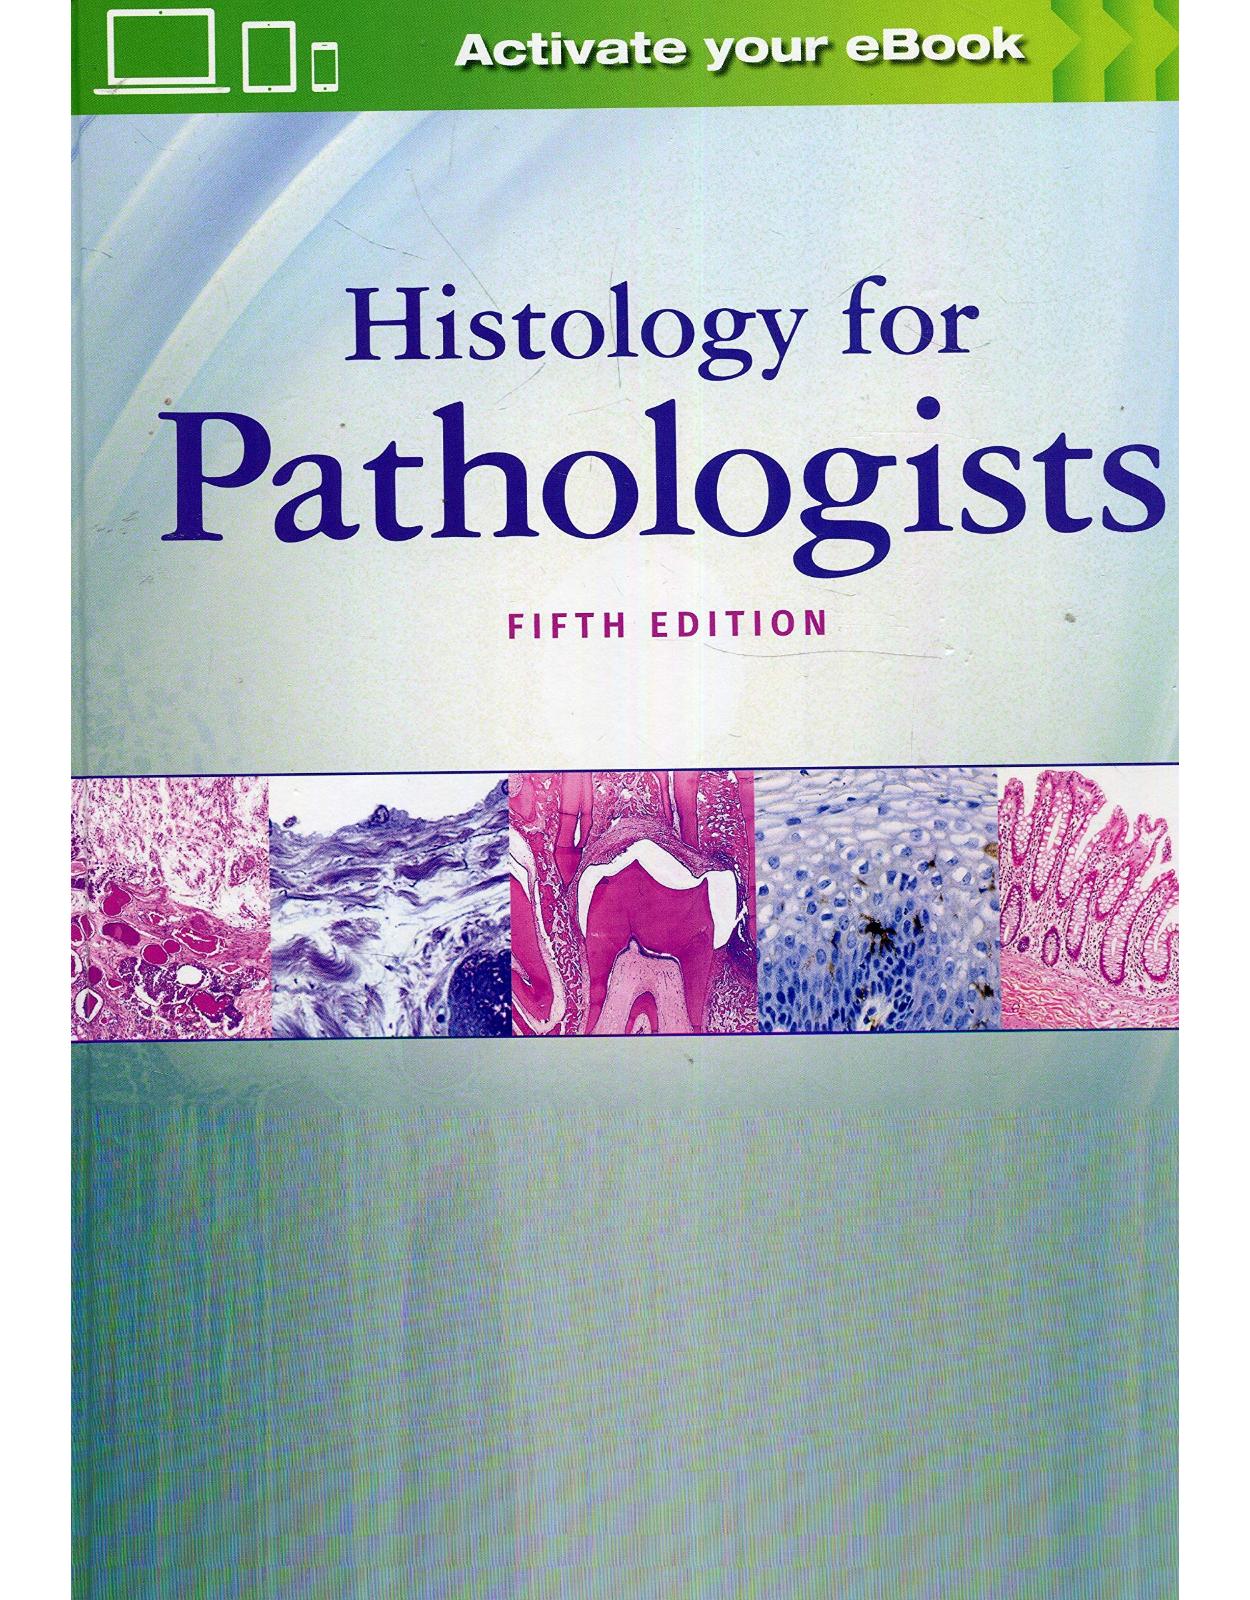 Histology for Pathologists. Fifth edition